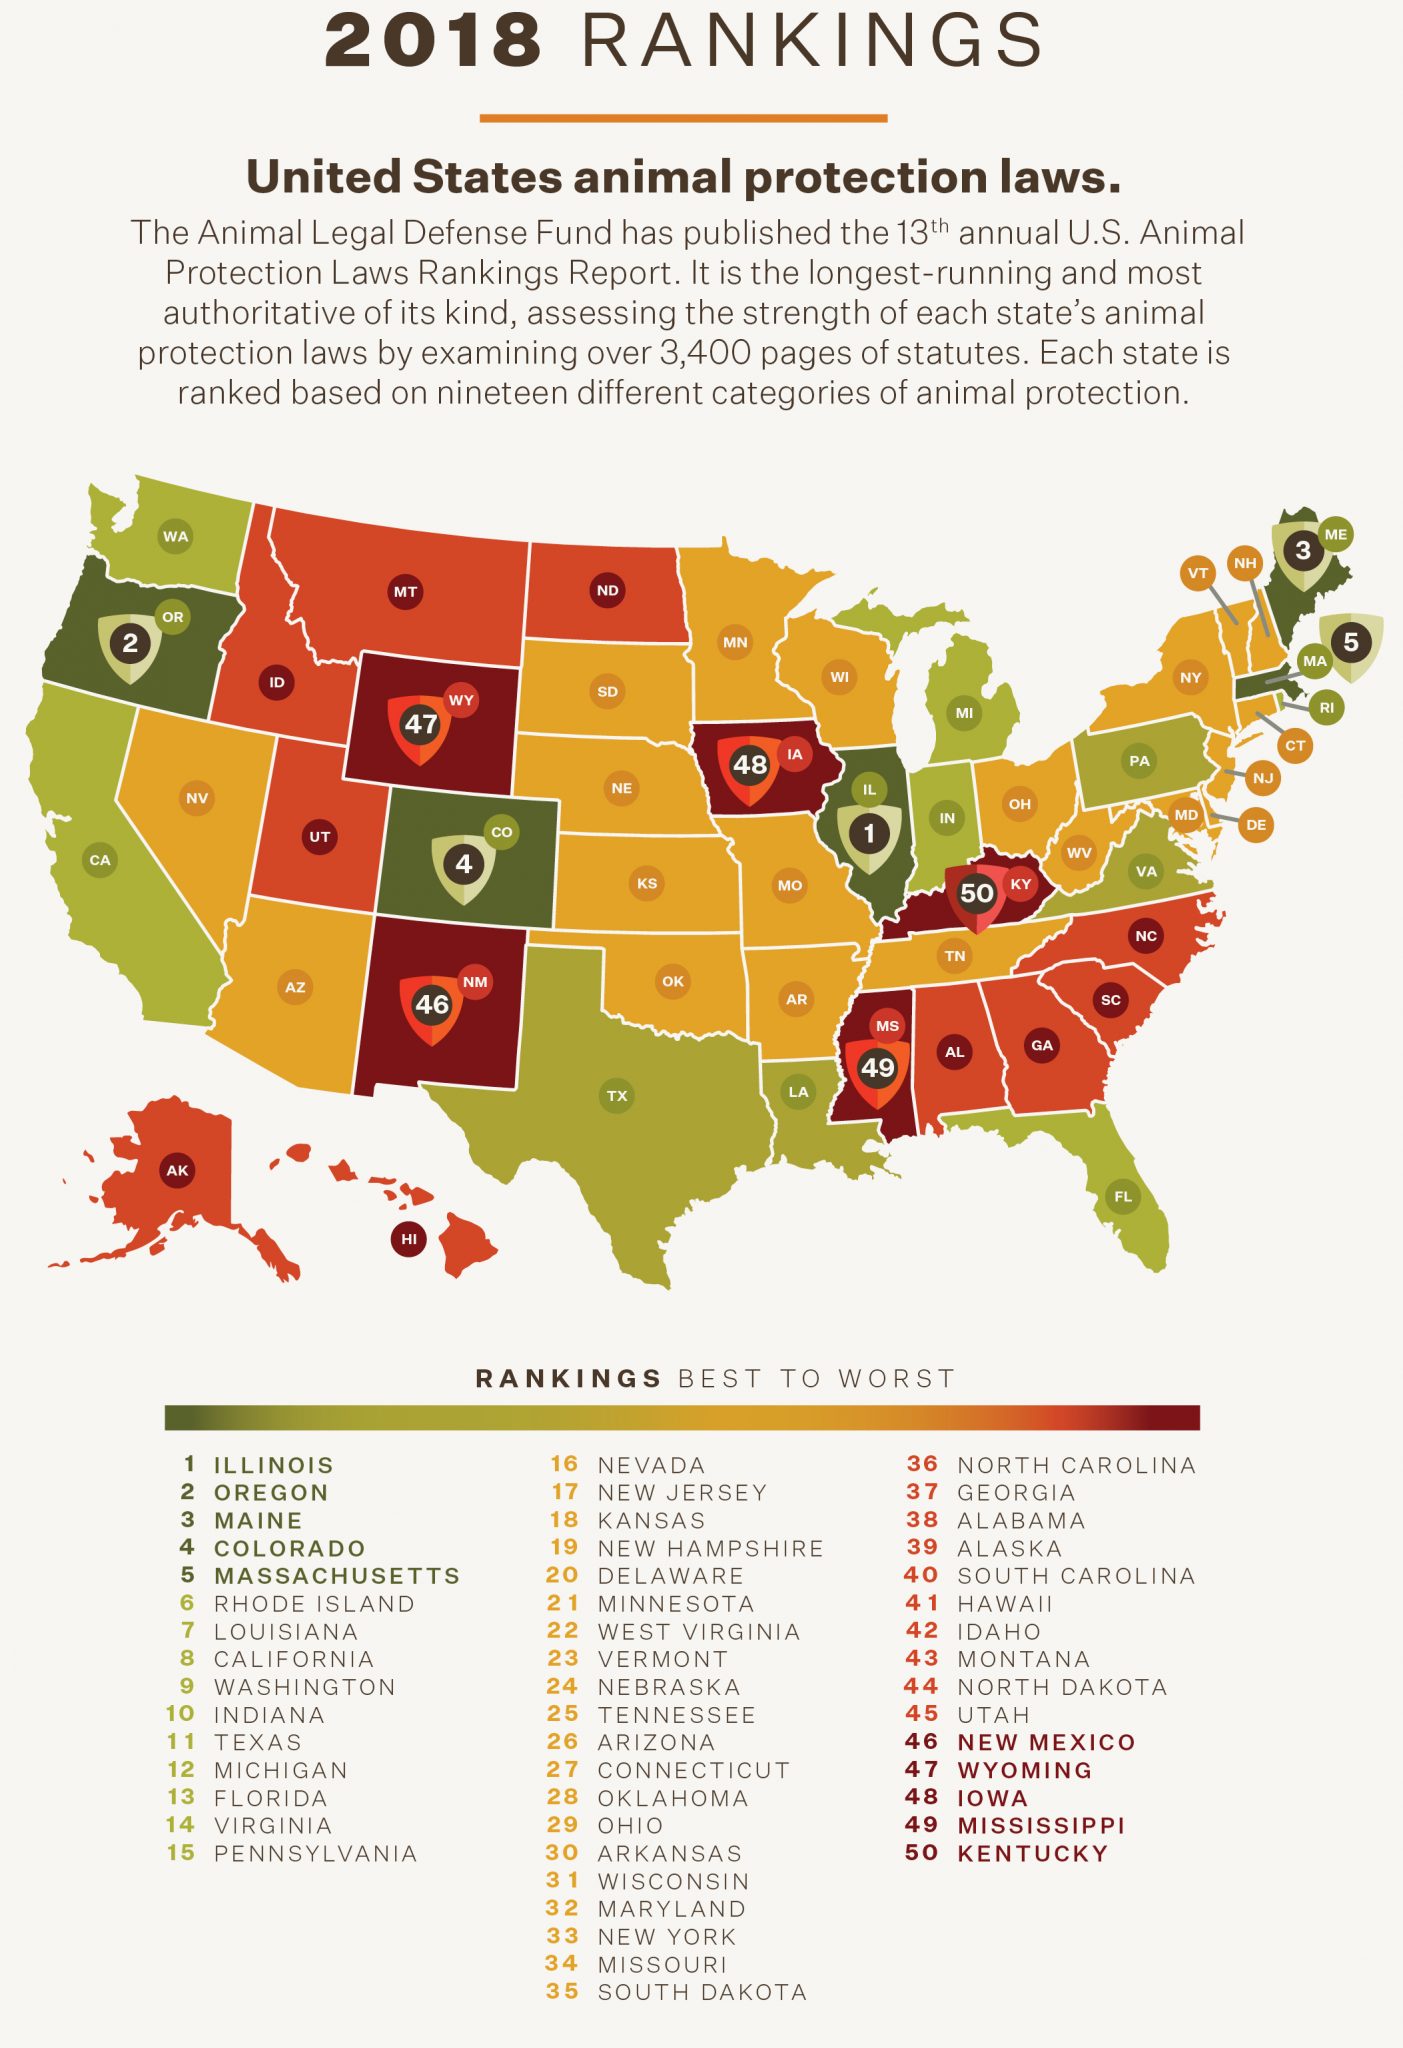 State Animal Protection Laws Ranked: Illinois is #1, Kentucky #50 - Animal  Legal Defense Fund